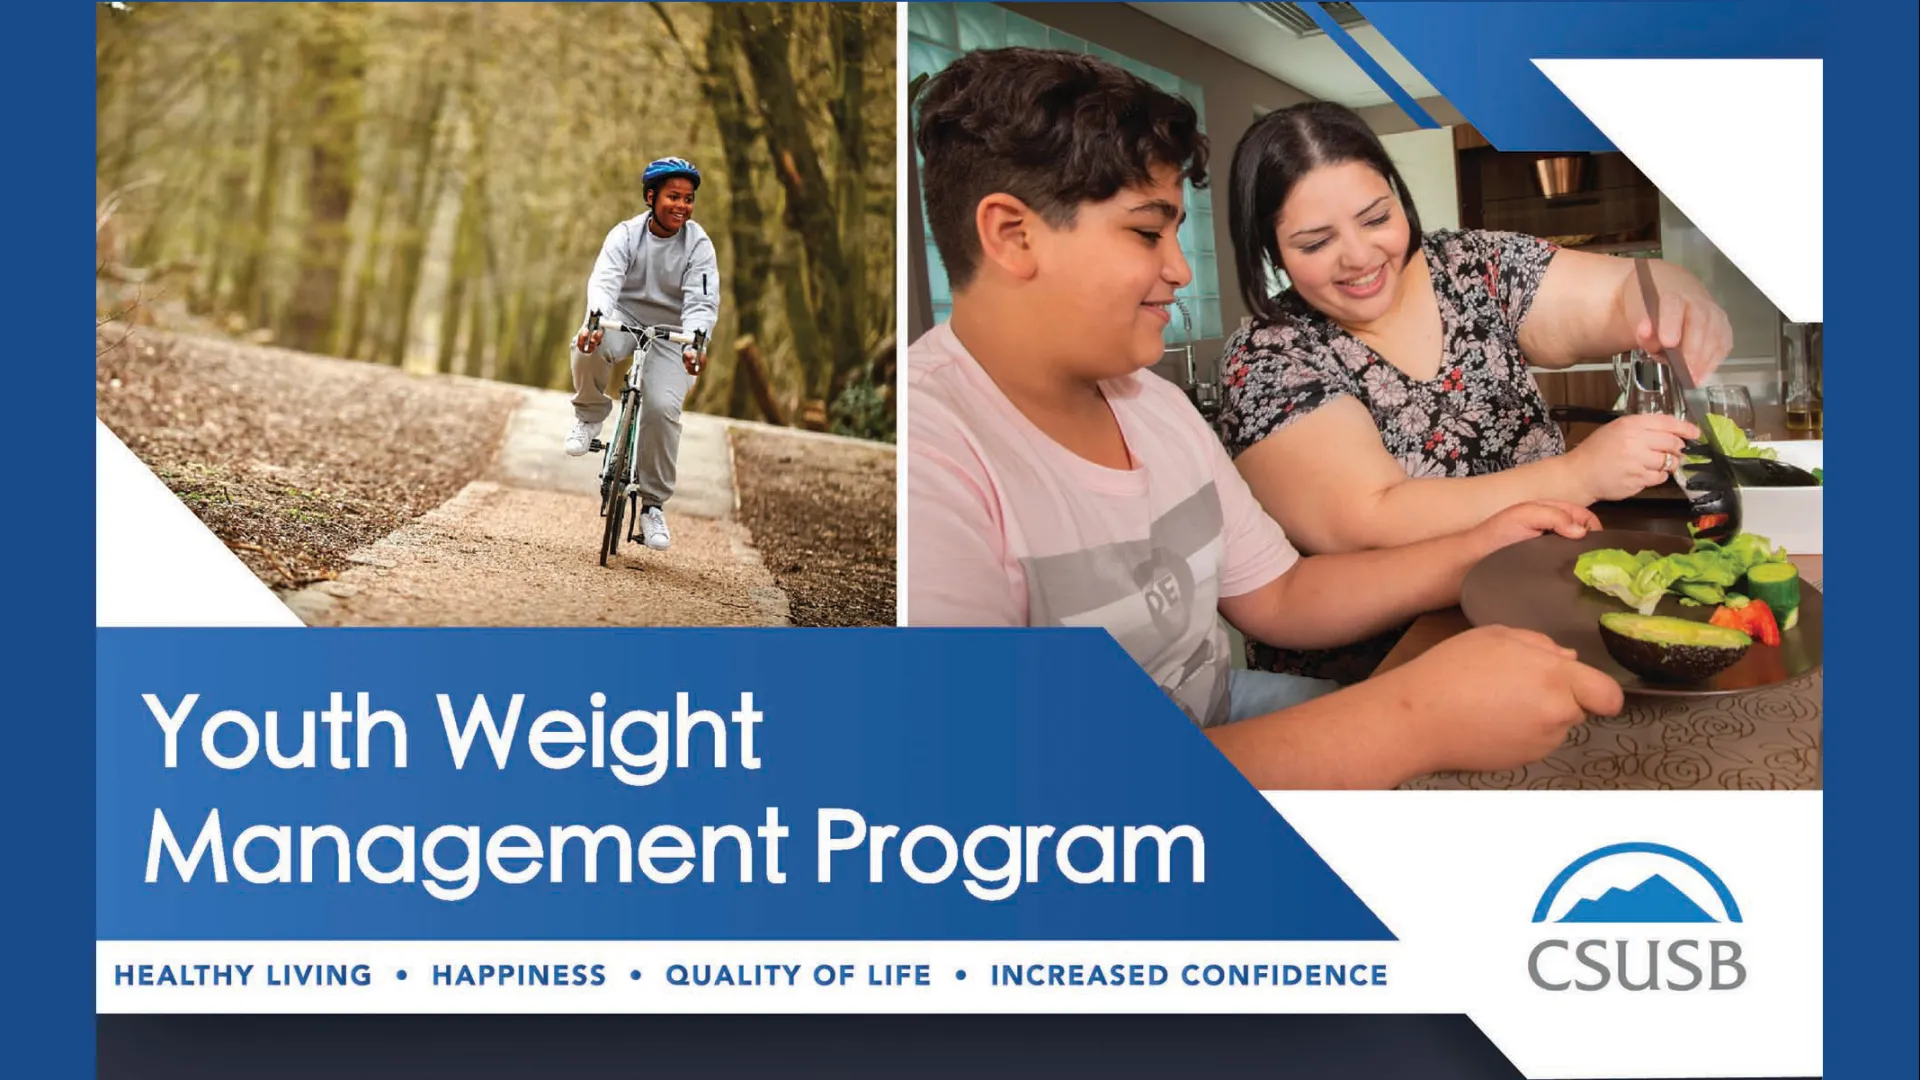 Portion of the Youth Weight Management Program flyer. Caption: